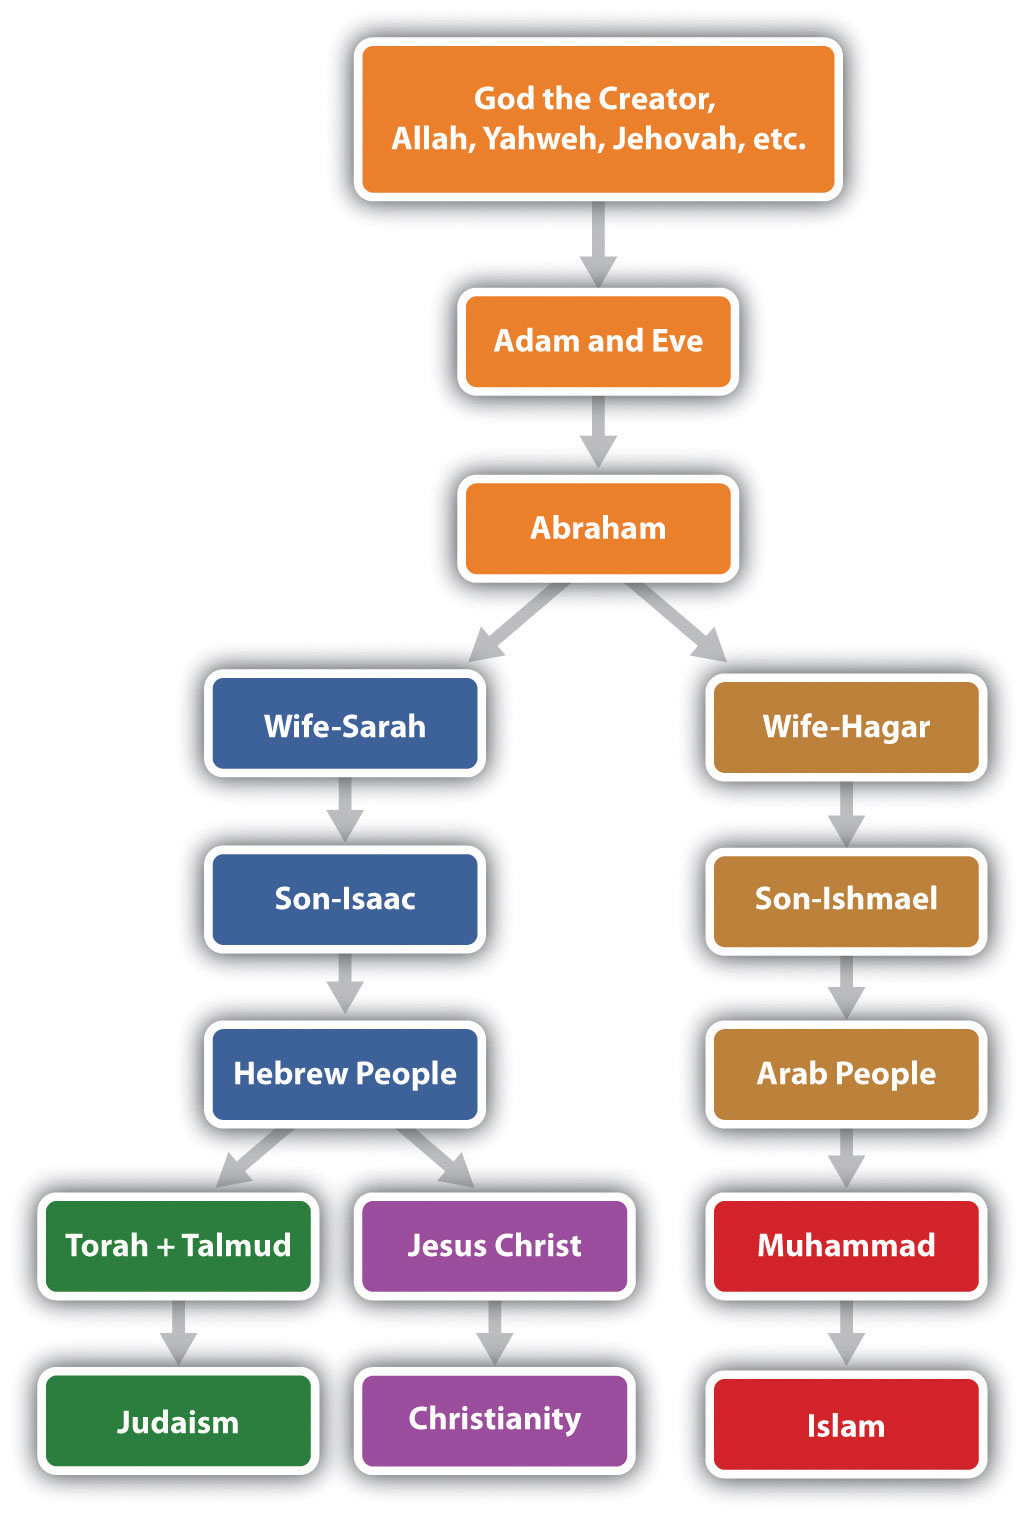 Judaism christianity and islam all originated in the middle east